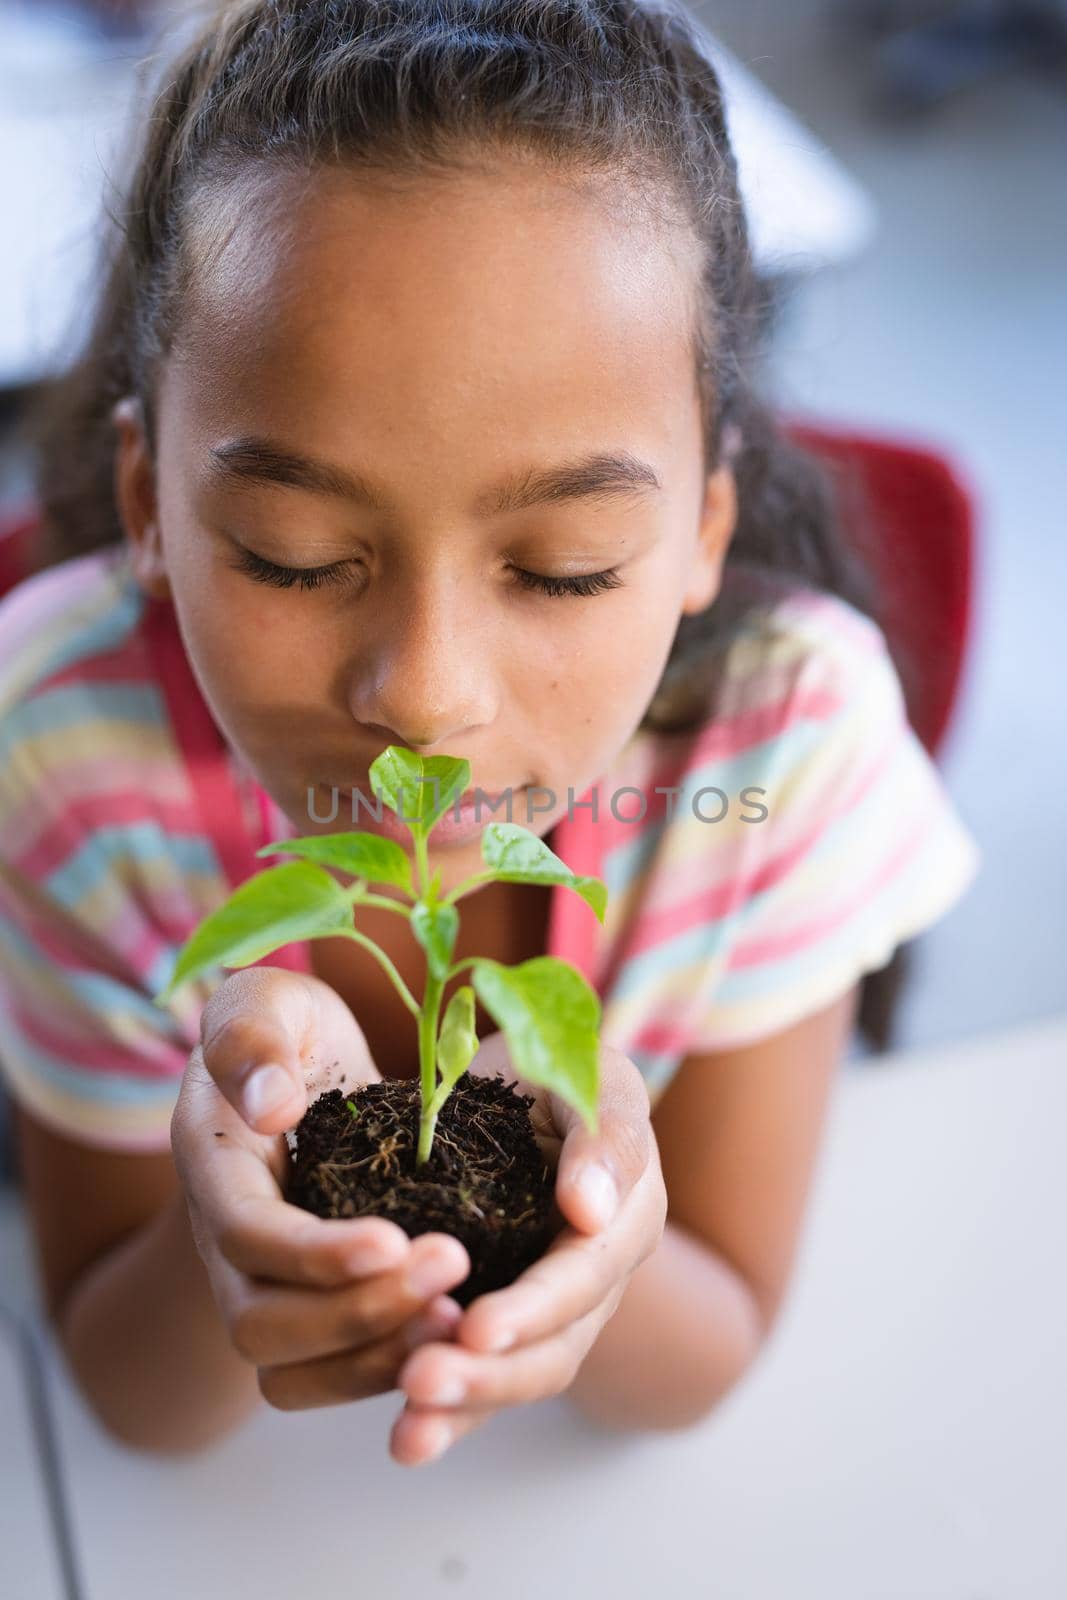 Close up of african american girl with eyes closed holding a plant seedling in the class at school. school and education concept